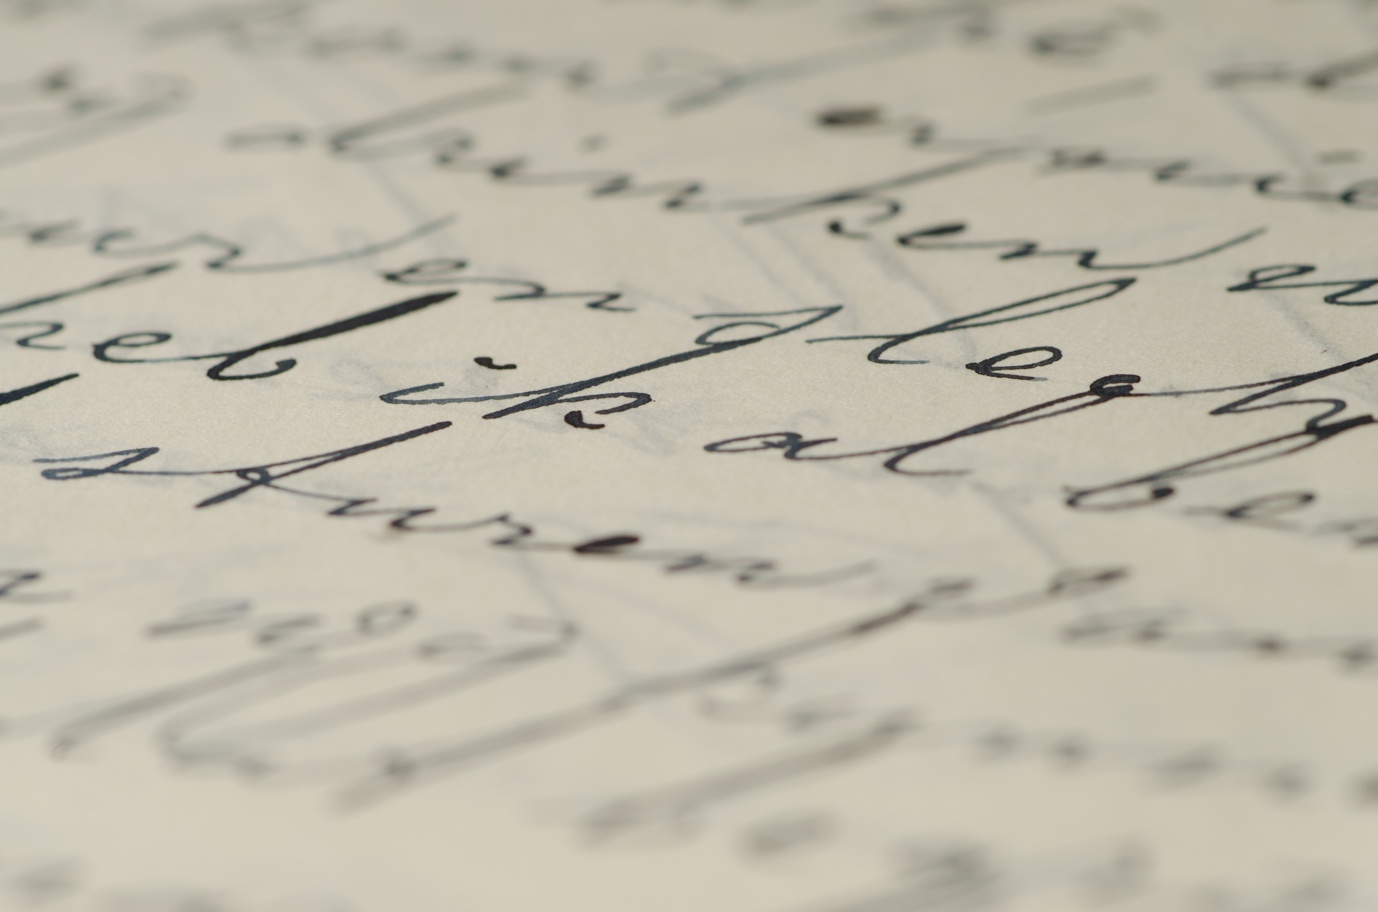 Closeup of cursive words written on paper with a fountain pen